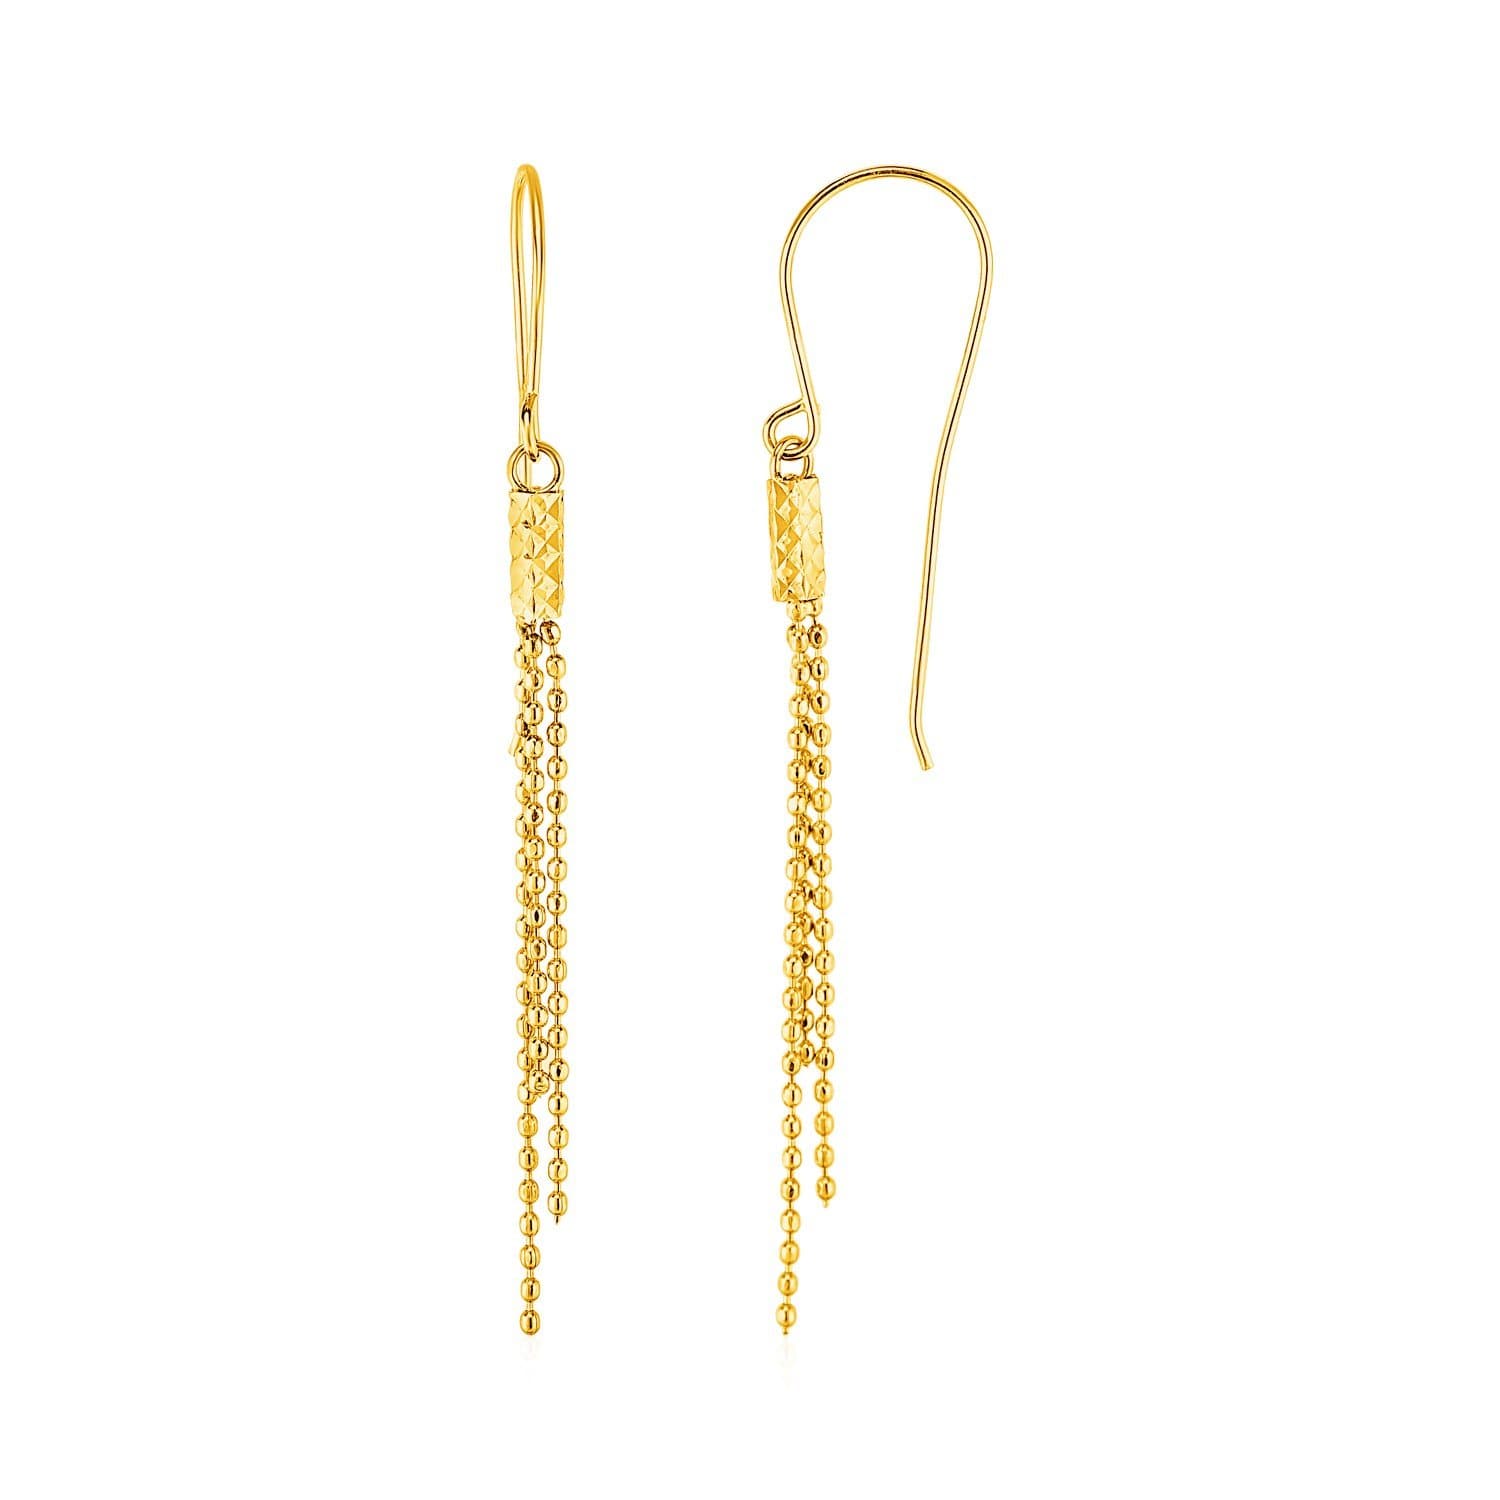 Earrings with Fine Chain Dangles in 10k Yellow Gold